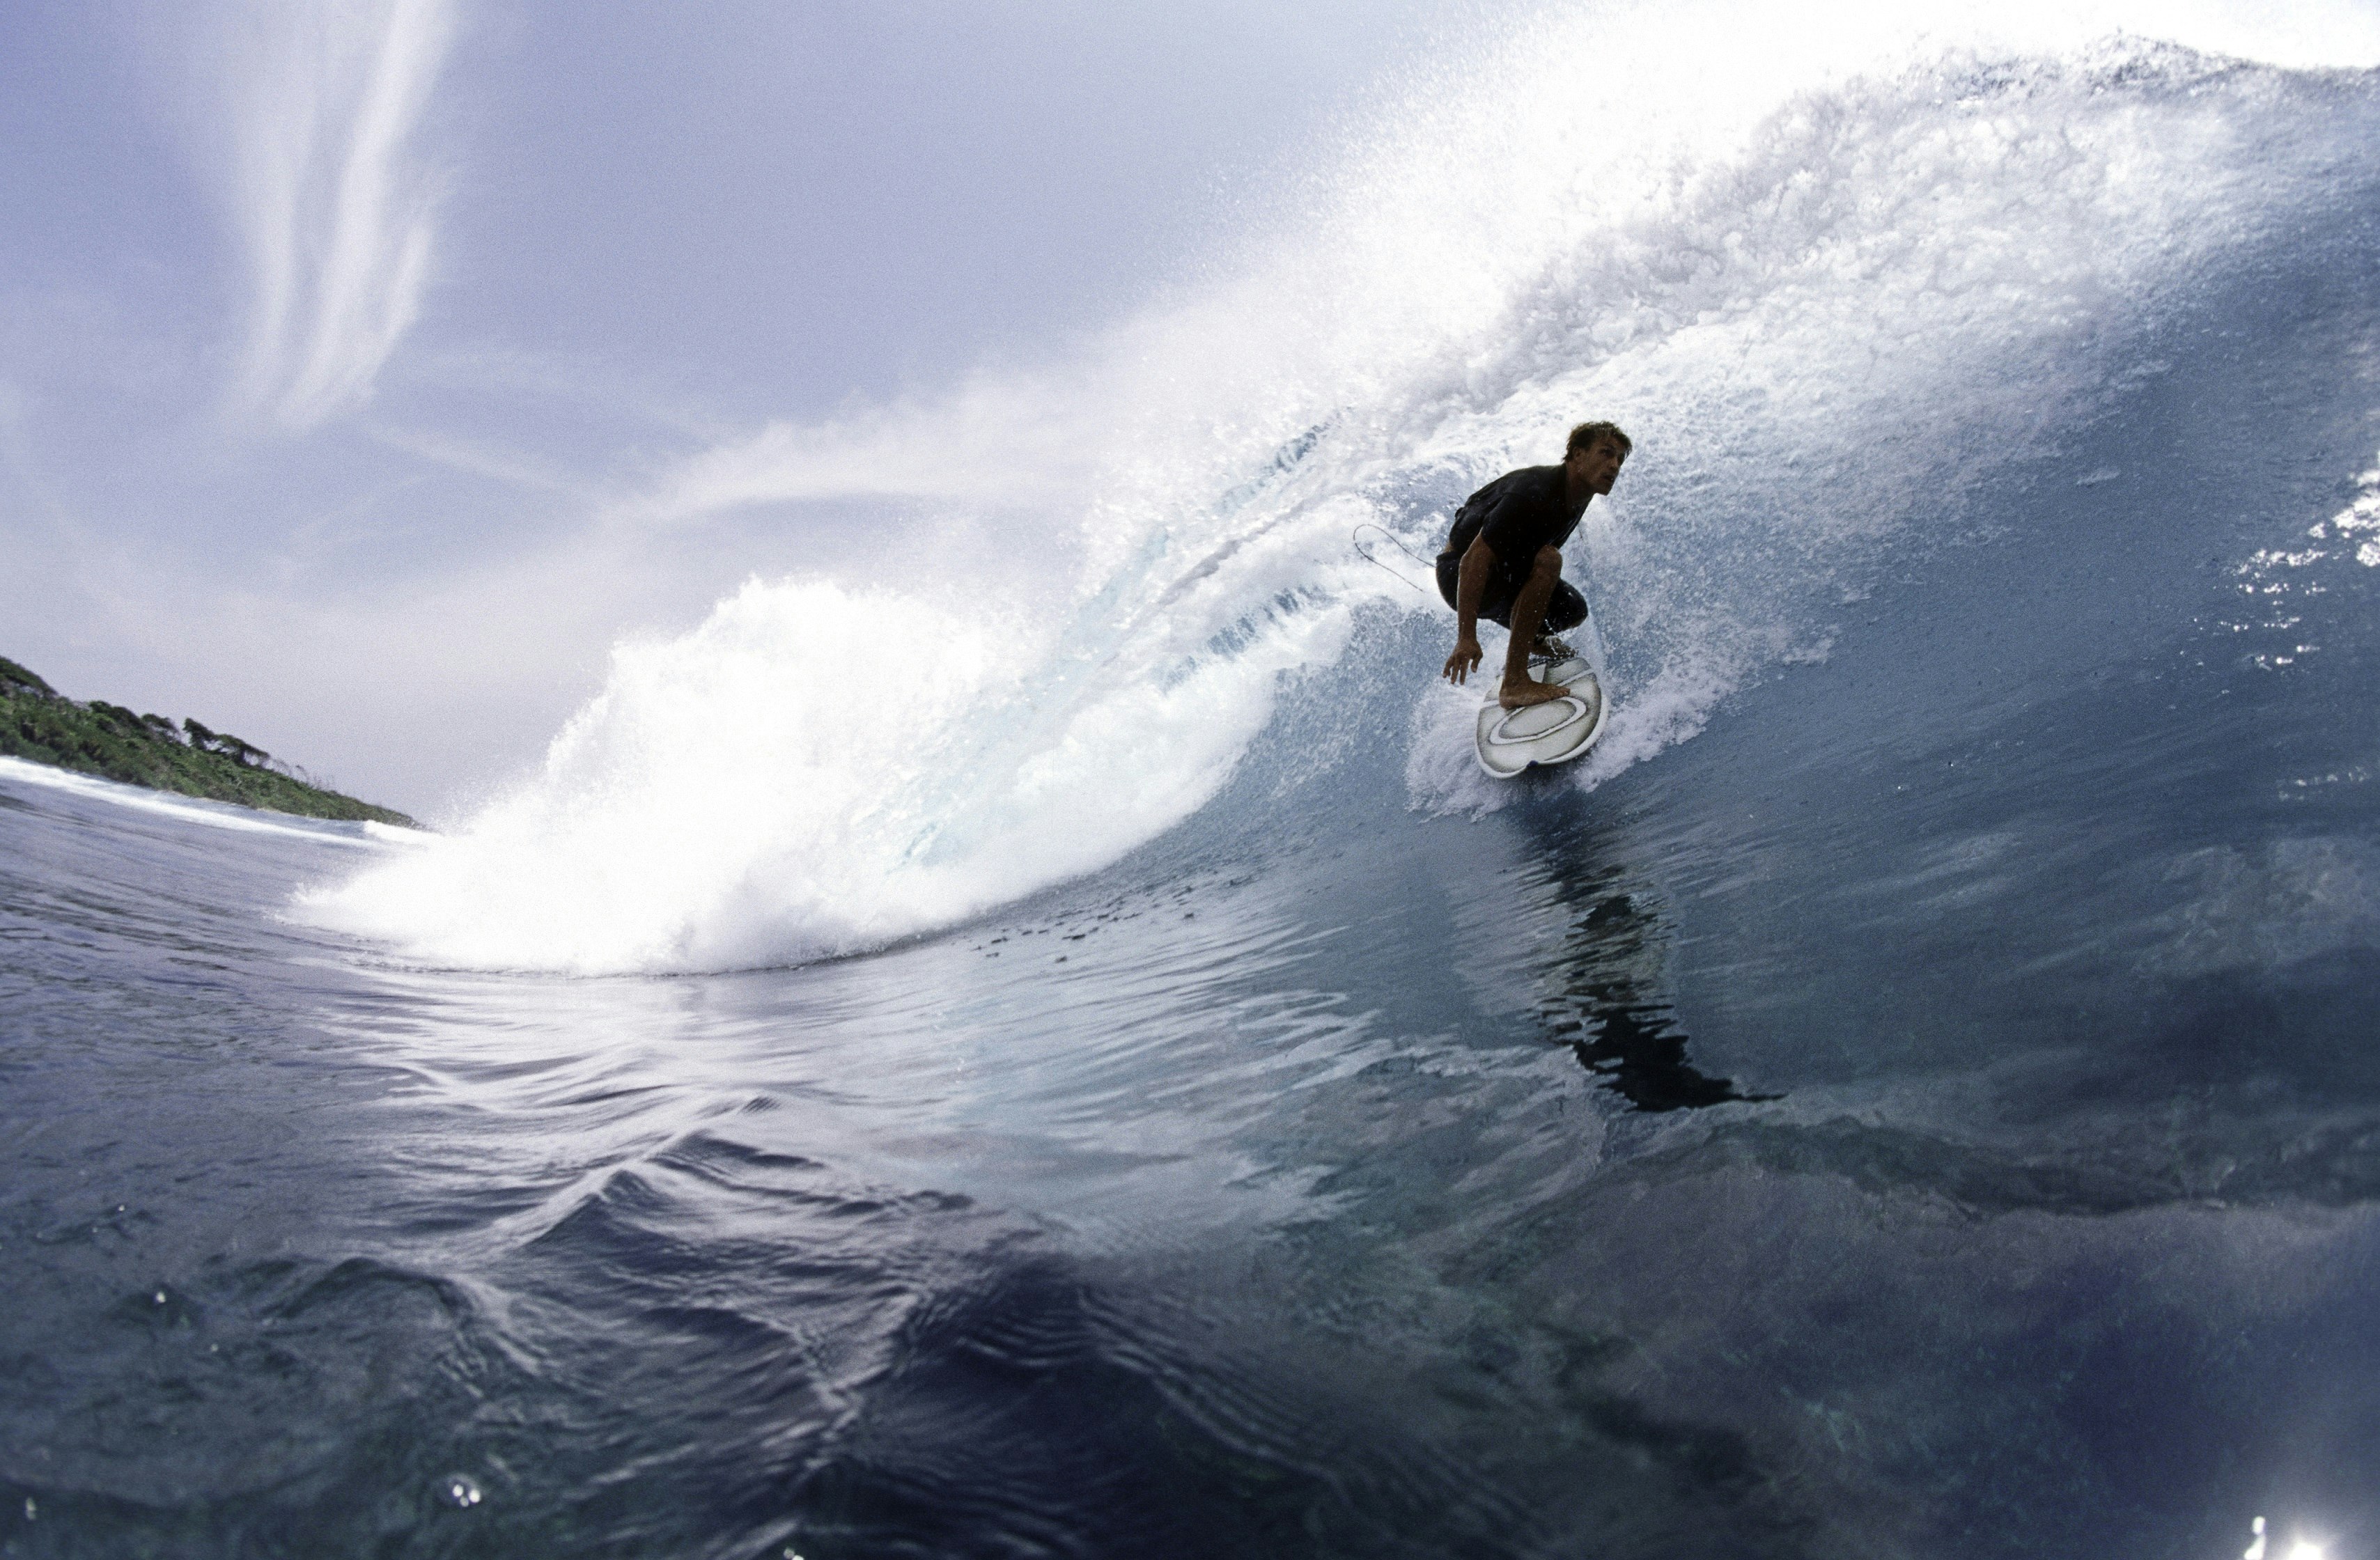 American surfer Sean Hayes rides a wave off the coast of the Andaman Islands